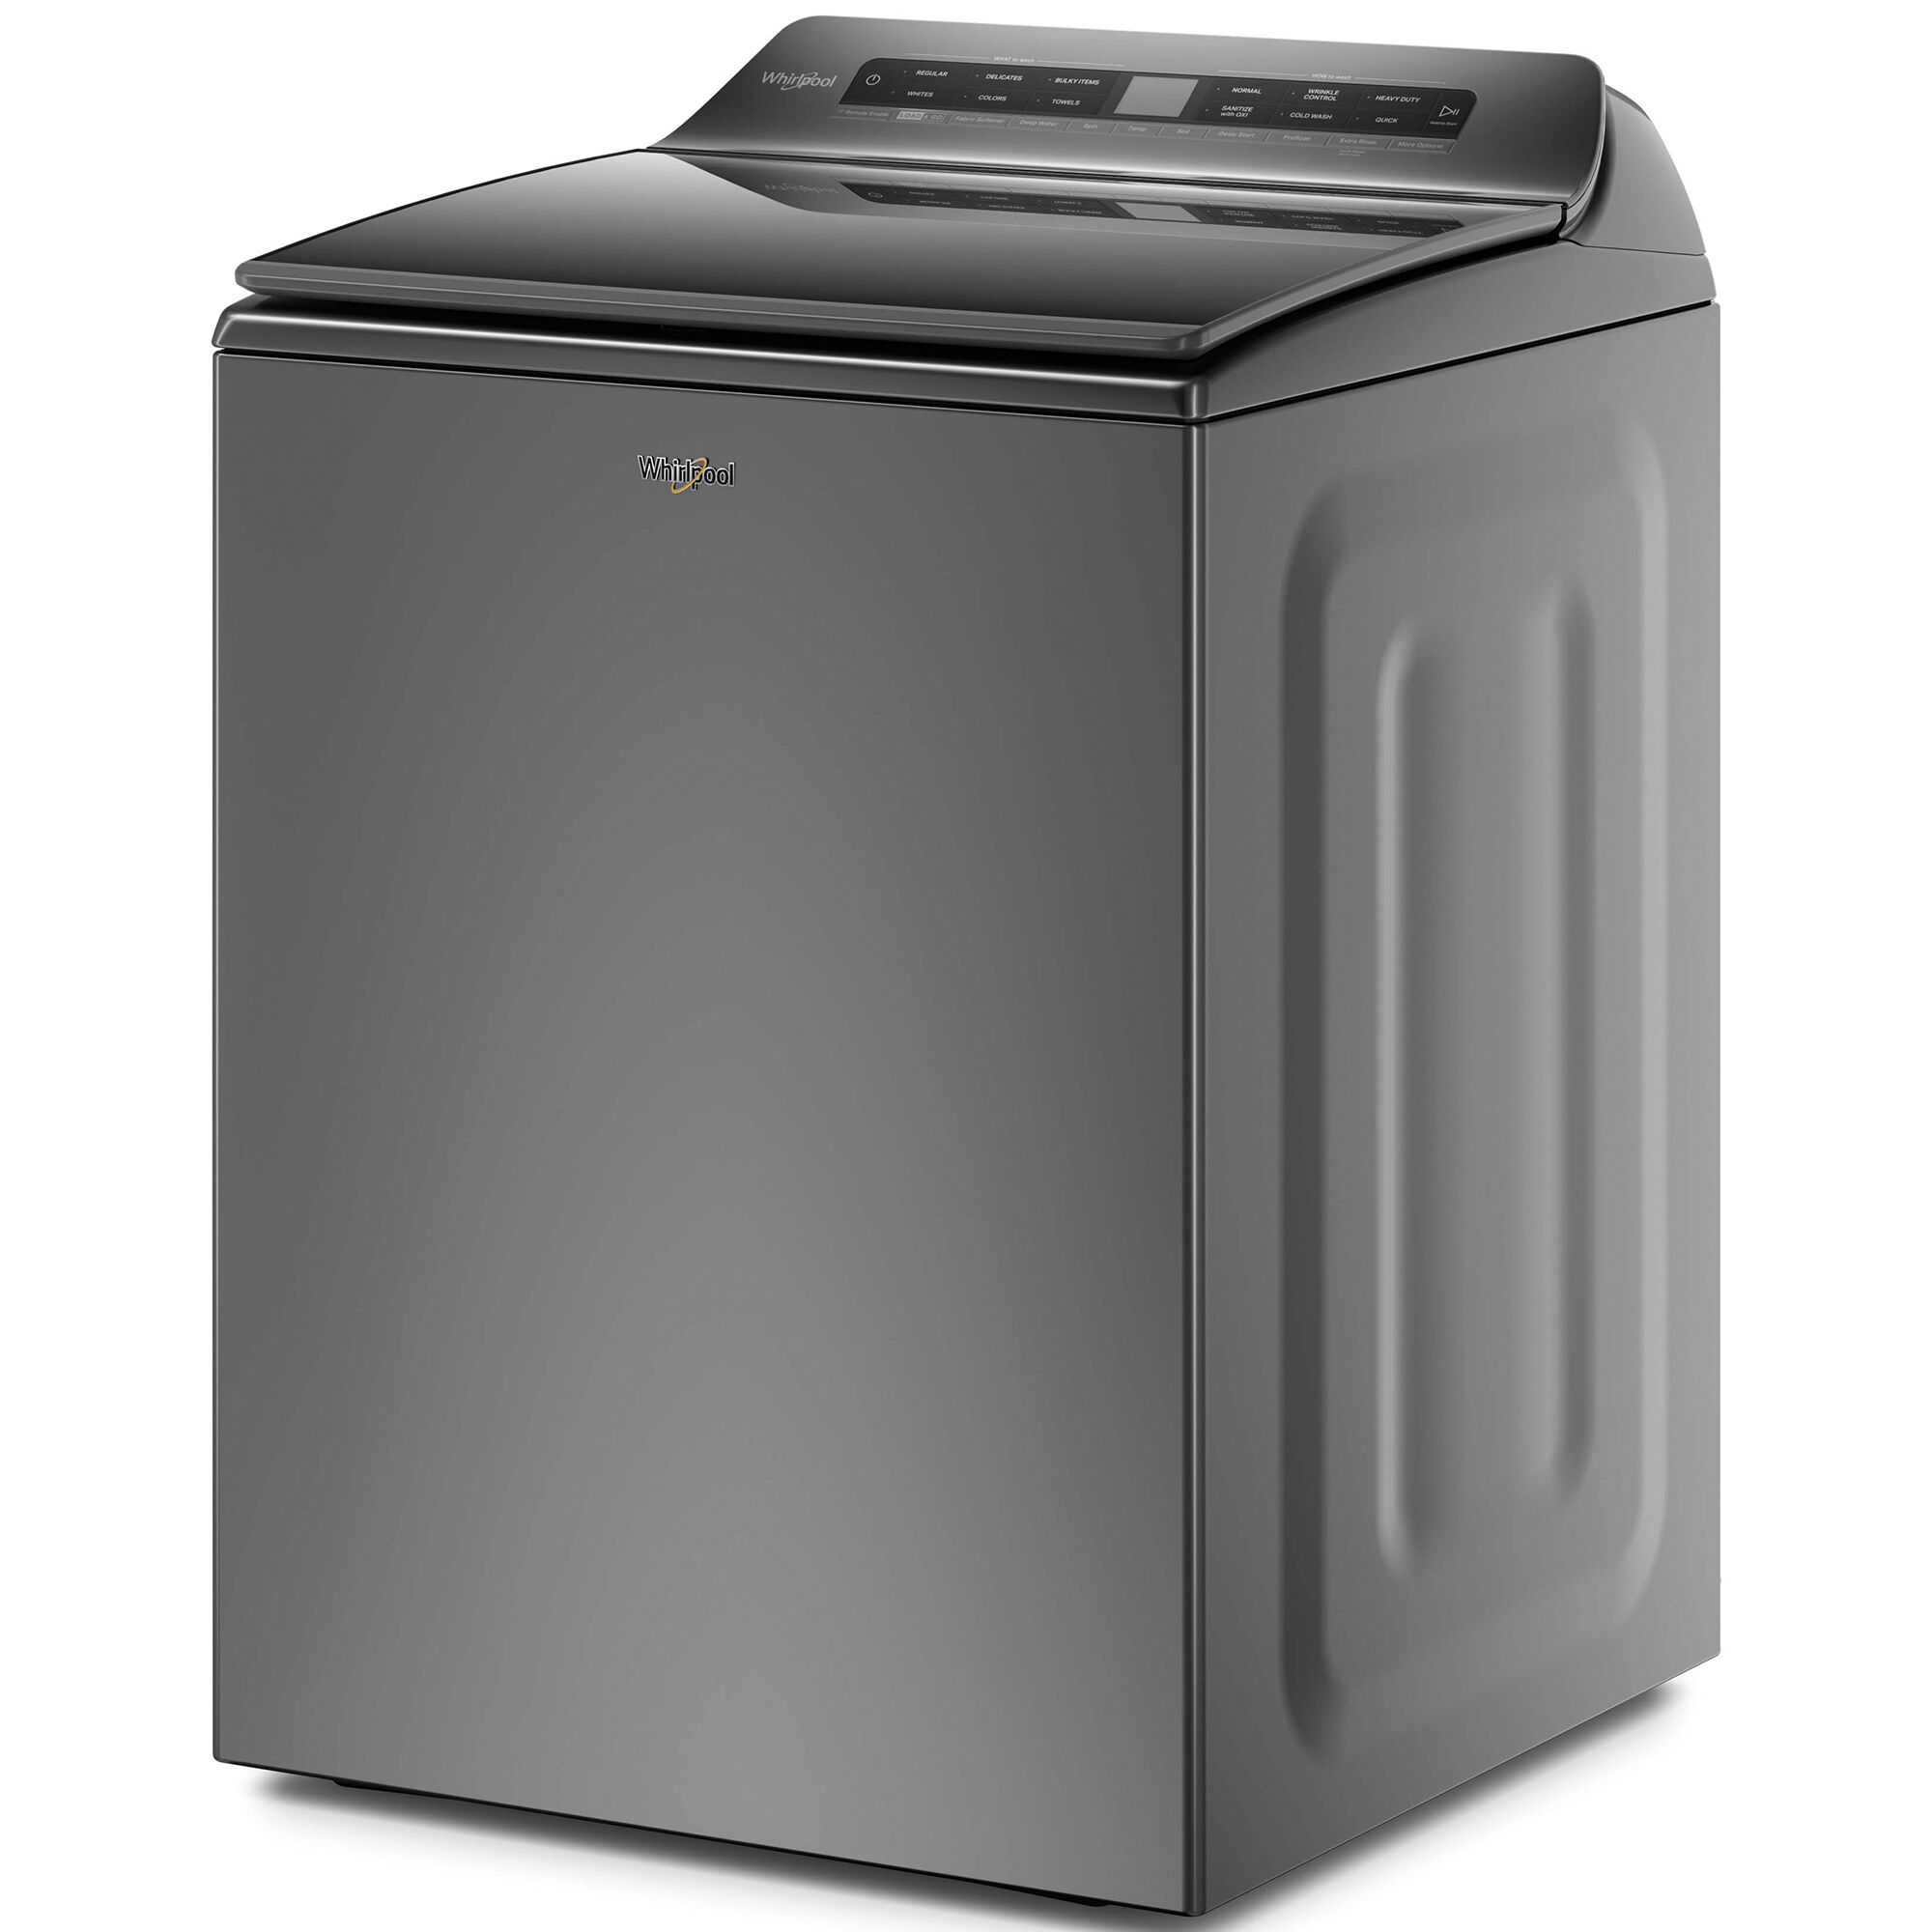 Whirlpool 27 in. 4.8 cu. ft. Smart Top Load Washer with Load & Go Dispenser  & Sanitize with Oxi - Chrome Shadow